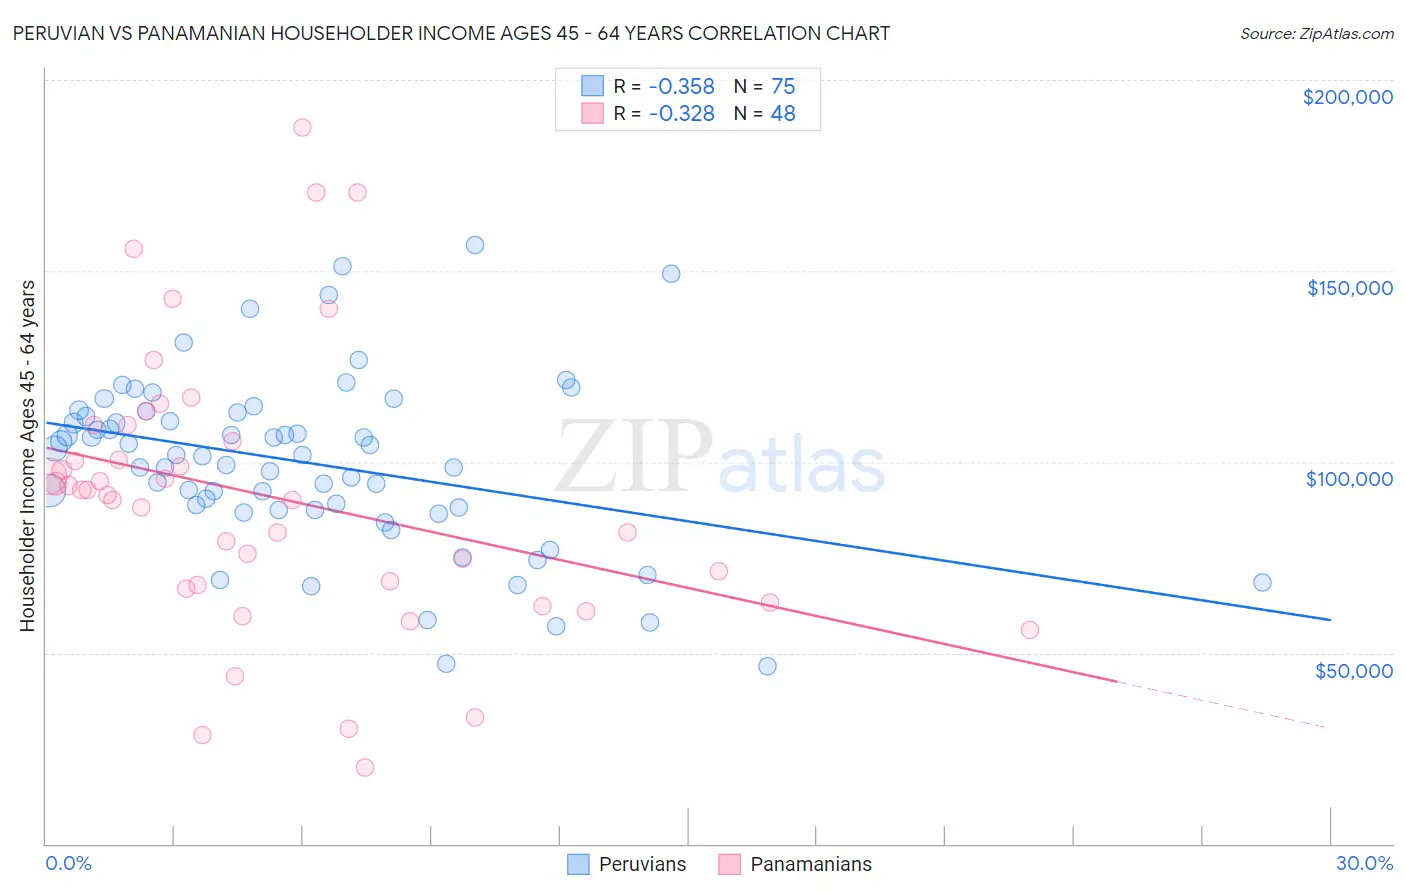 Peruvian vs Panamanian Householder Income Ages 45 - 64 years